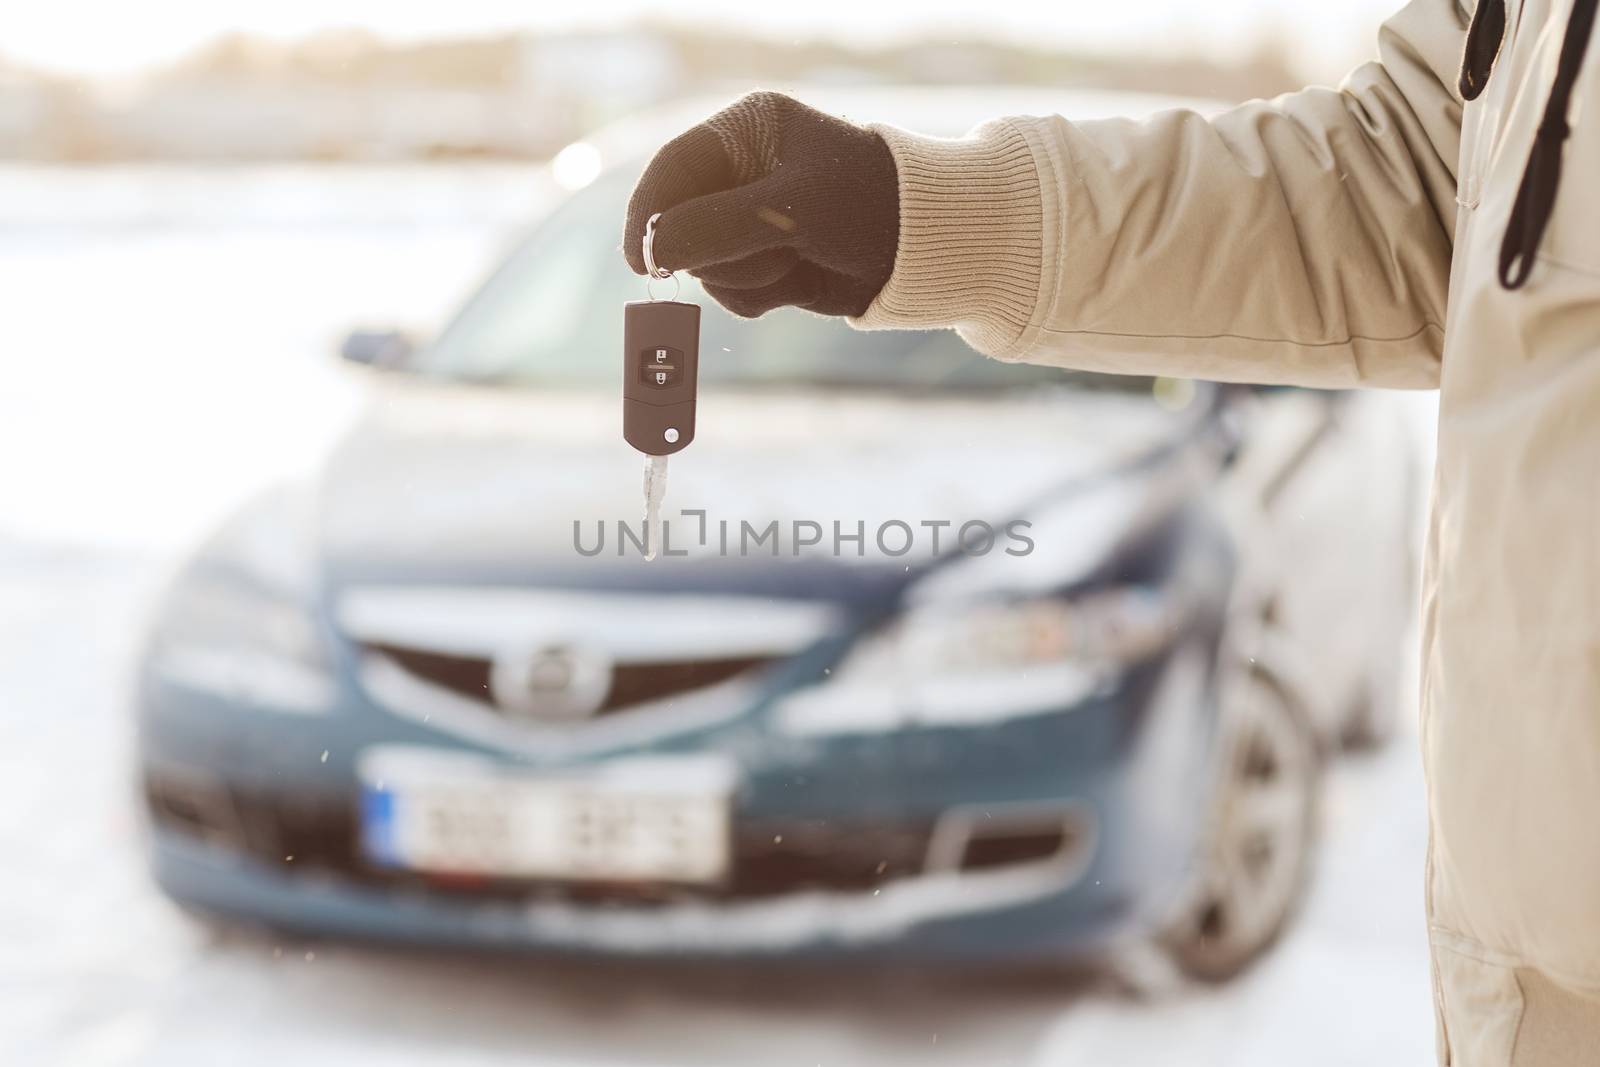 transportation and ownership concept - closeup of man hand with car key outdoors